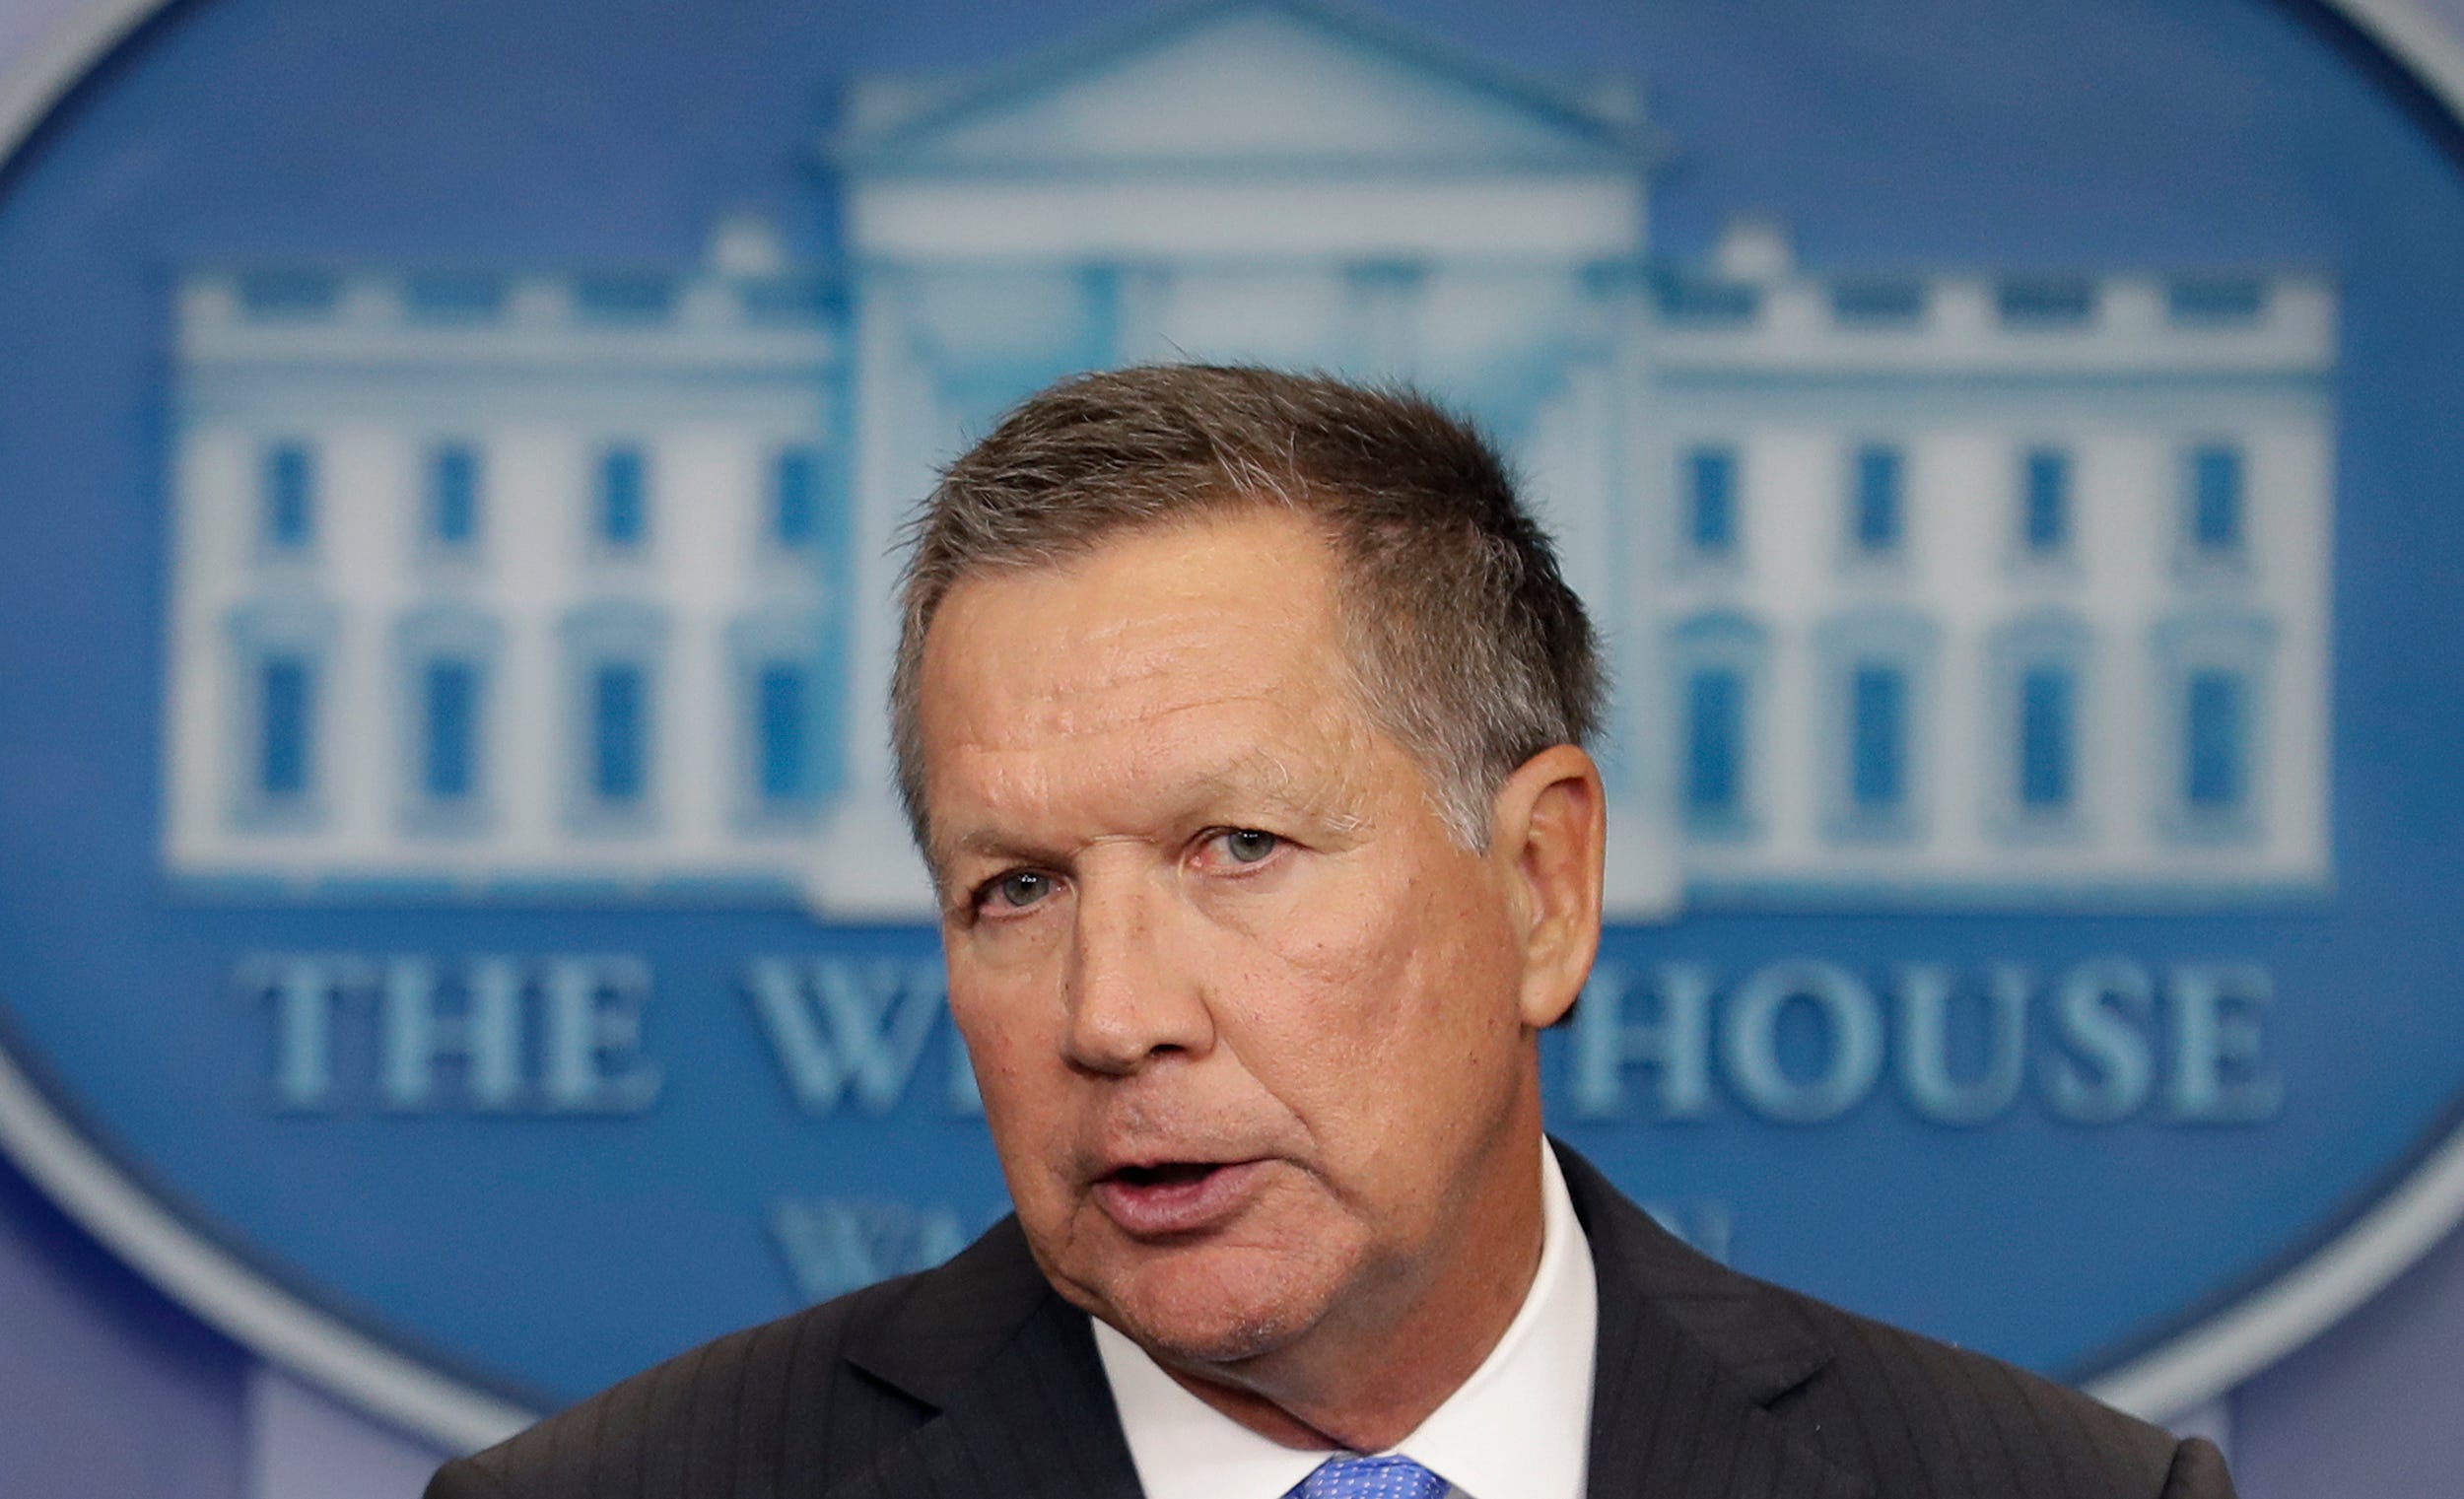 Kasich attends Trump inauguration because ...